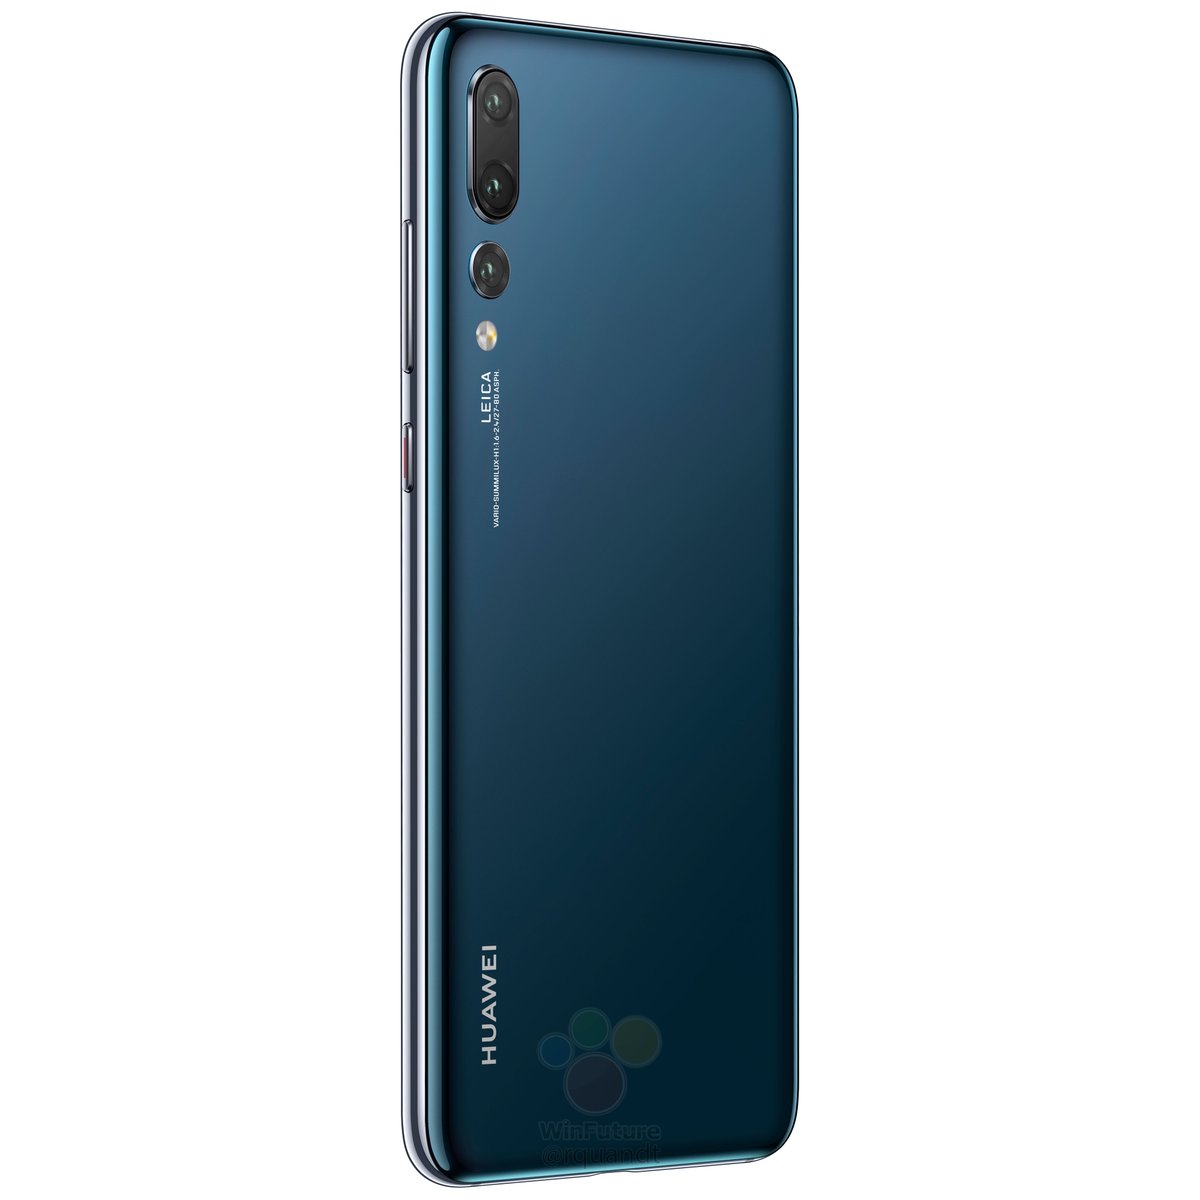 Huawei p20 pro android p release date